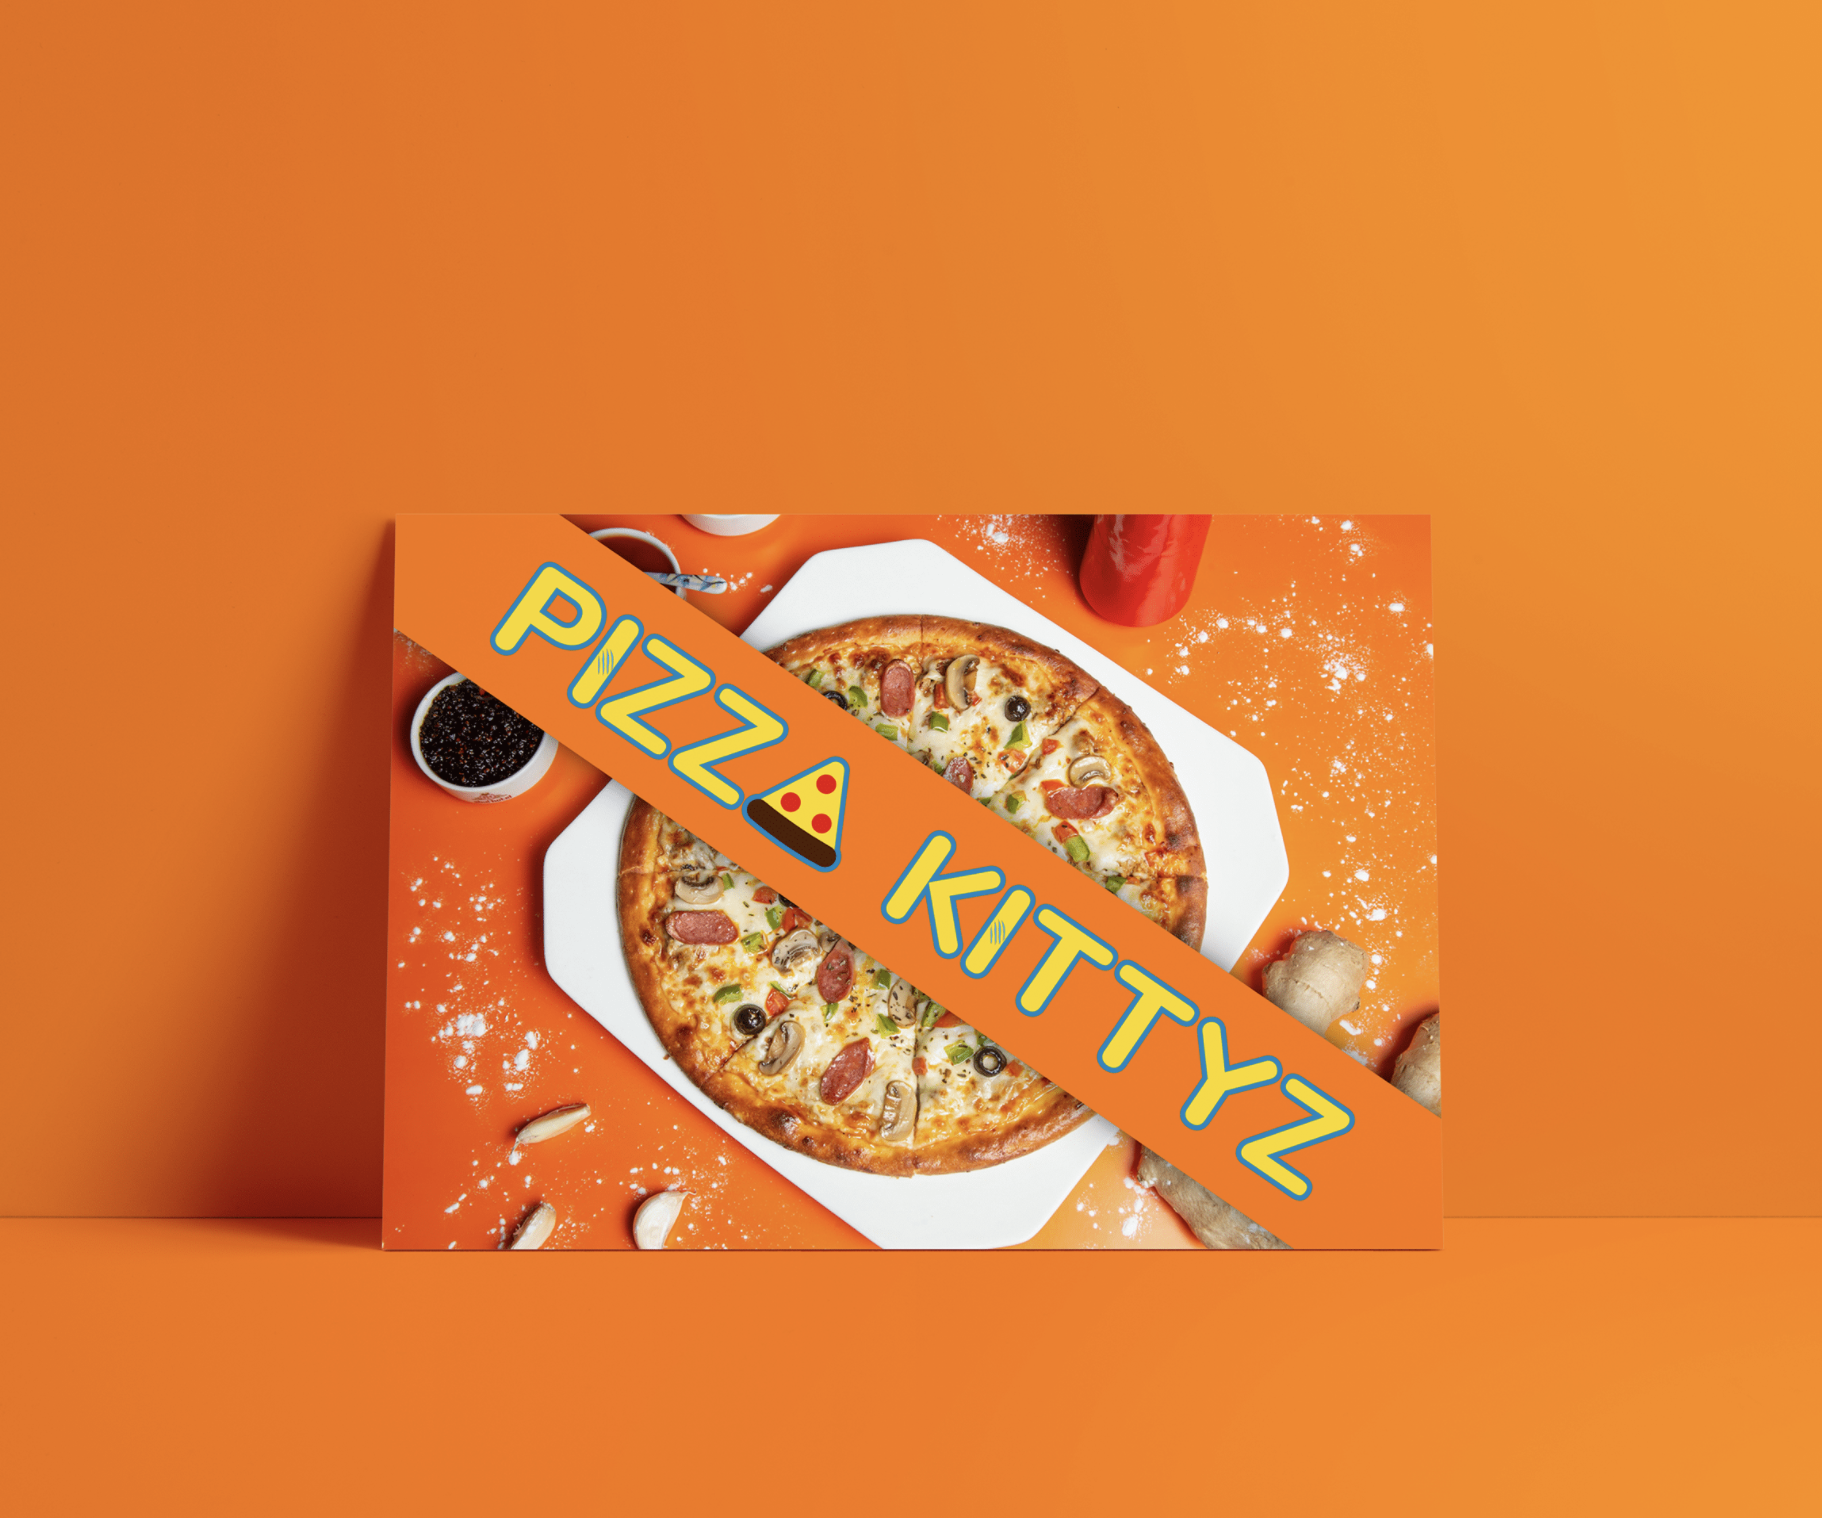 mockup of poster for Pizza Kittyz, a fictional brand created by B.F.A. Design student Luis Angeles and his little sister